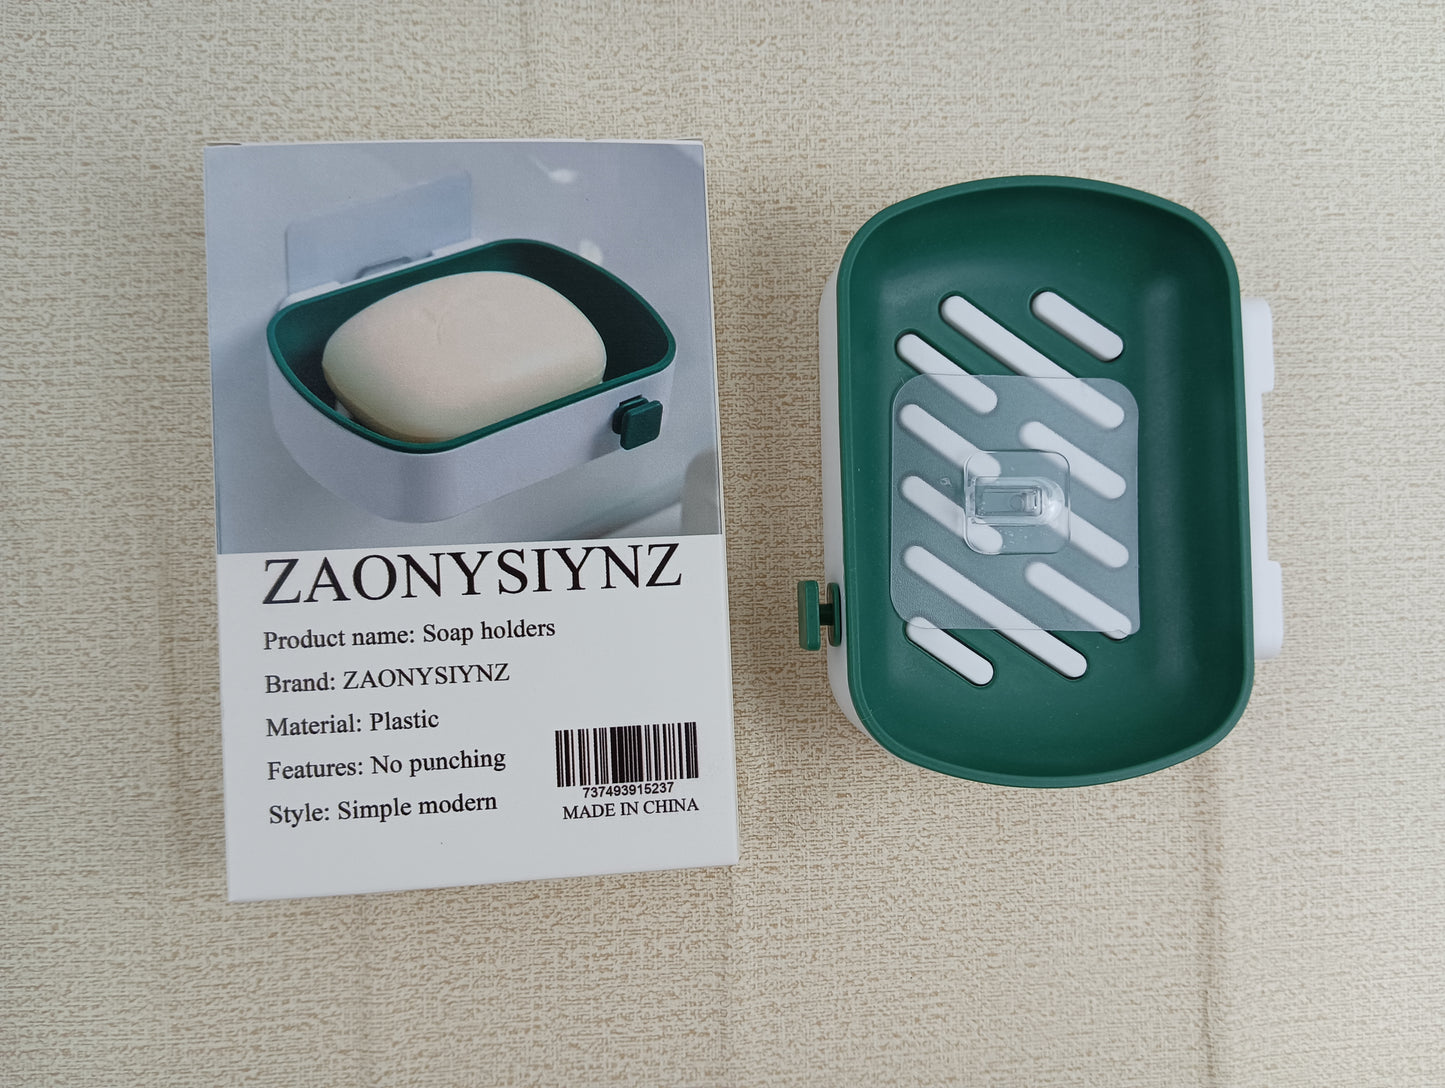 ZAONYSIYNZ Soap holders and boxes no-punch soap box double drain large wall mounted soap box bathroom soap box soap holder